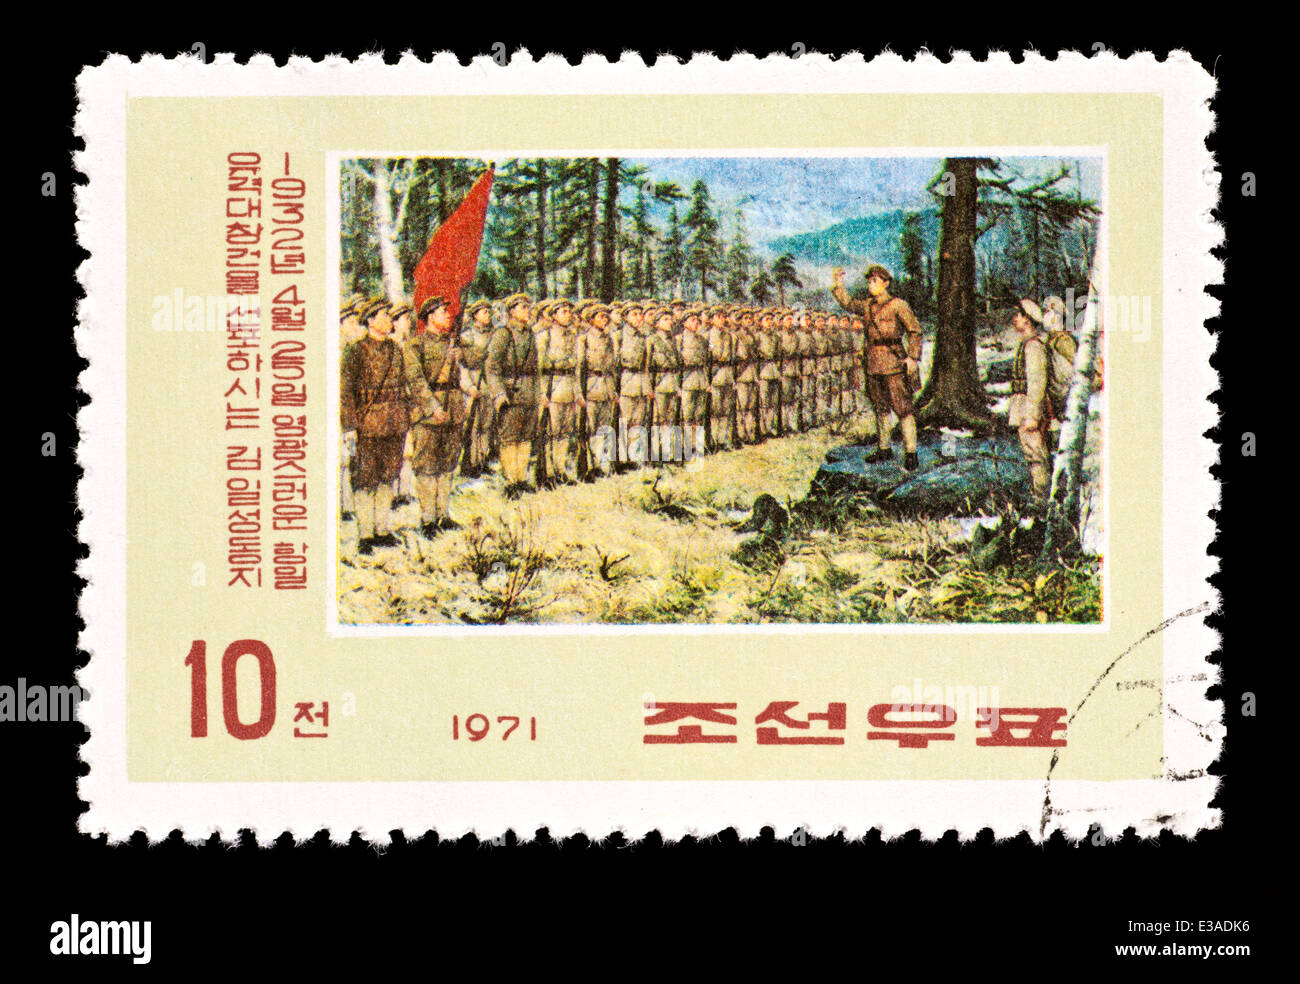 Postage stamp from North Korea depicting Kim Il Sung reviewing Anti-Japanese Guerrilla Army in 1932 Stock Photo